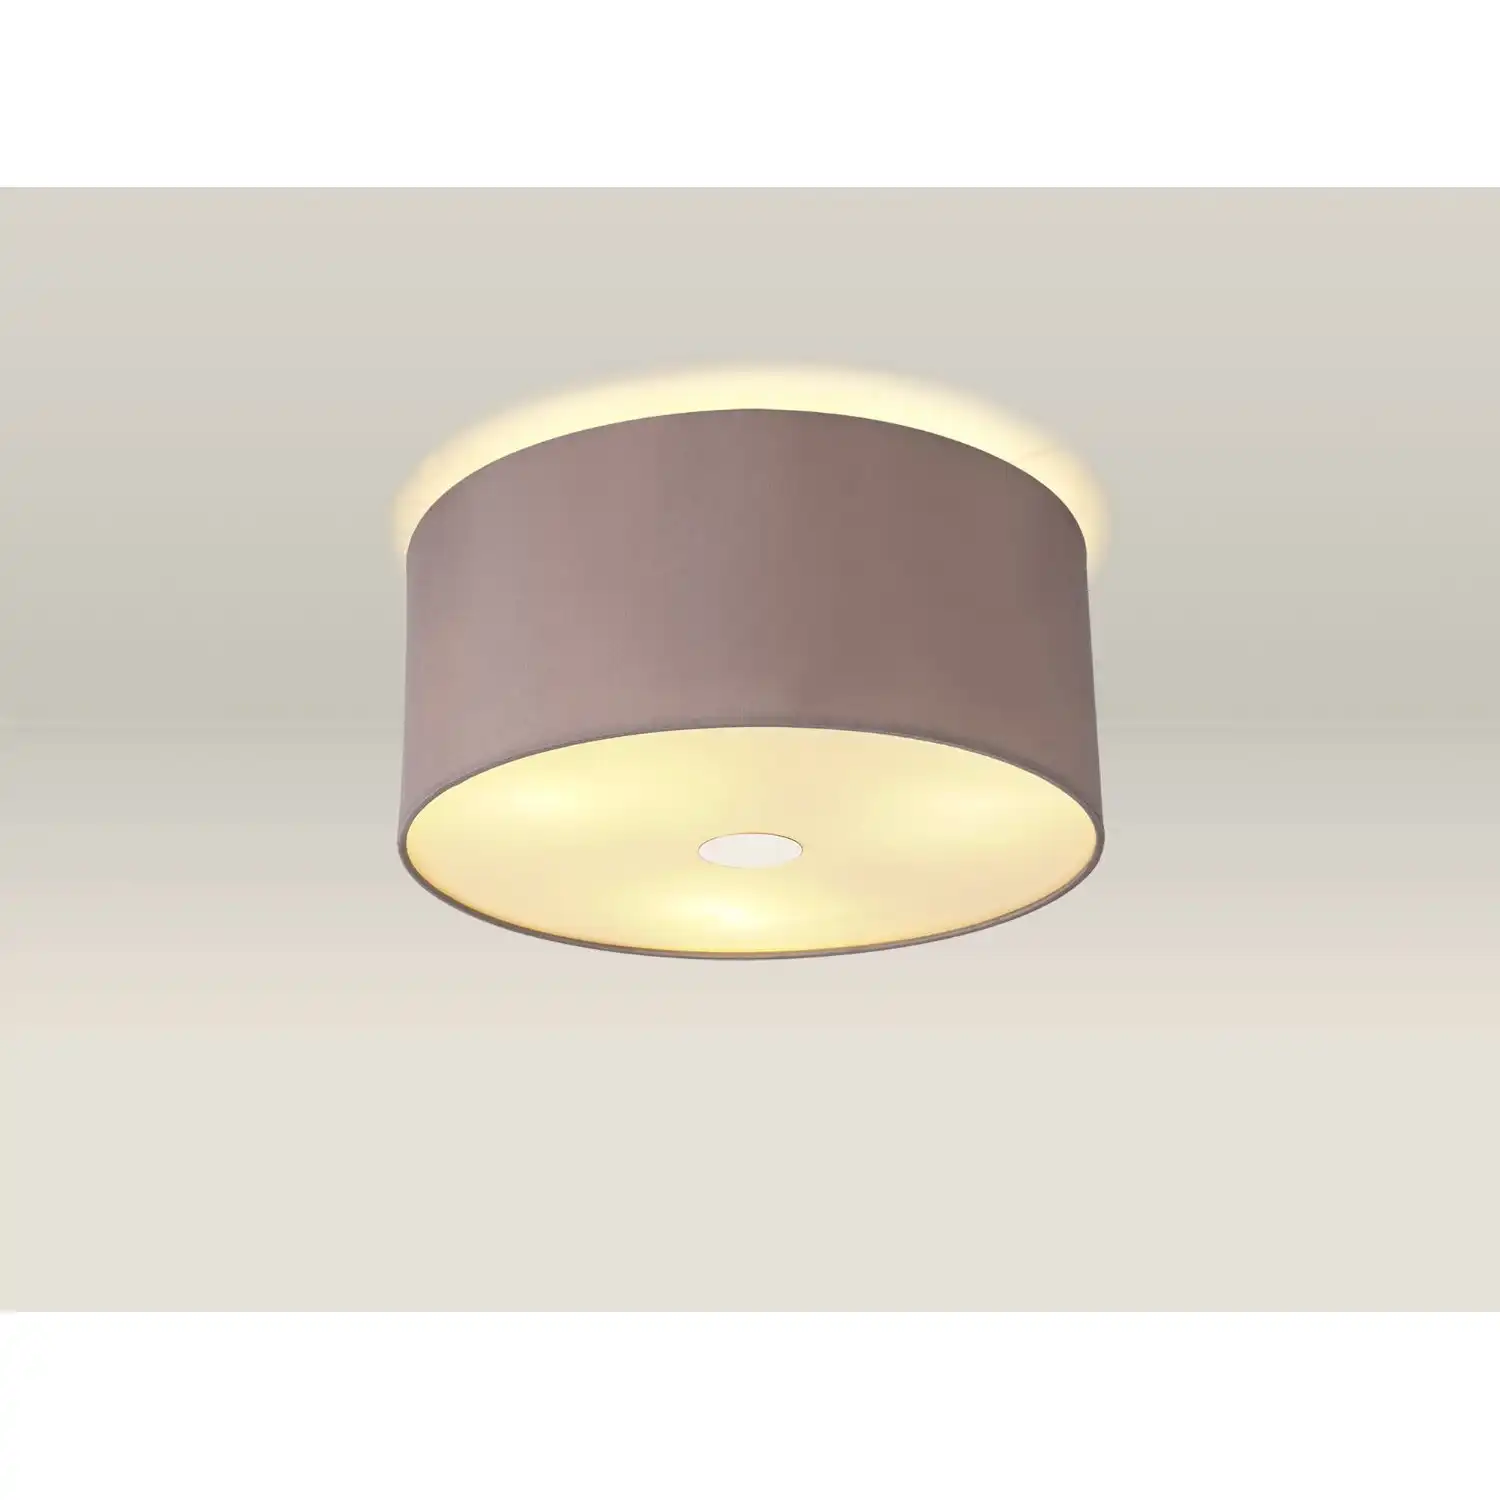 Baymont Polished Chrome 3 Light E27 Drop Flush Ceiling c w 400 Dual Faux Silk Fabric Shade, Taupe Halo Gold And 400mm Frosted PC Acrylic Diffuser